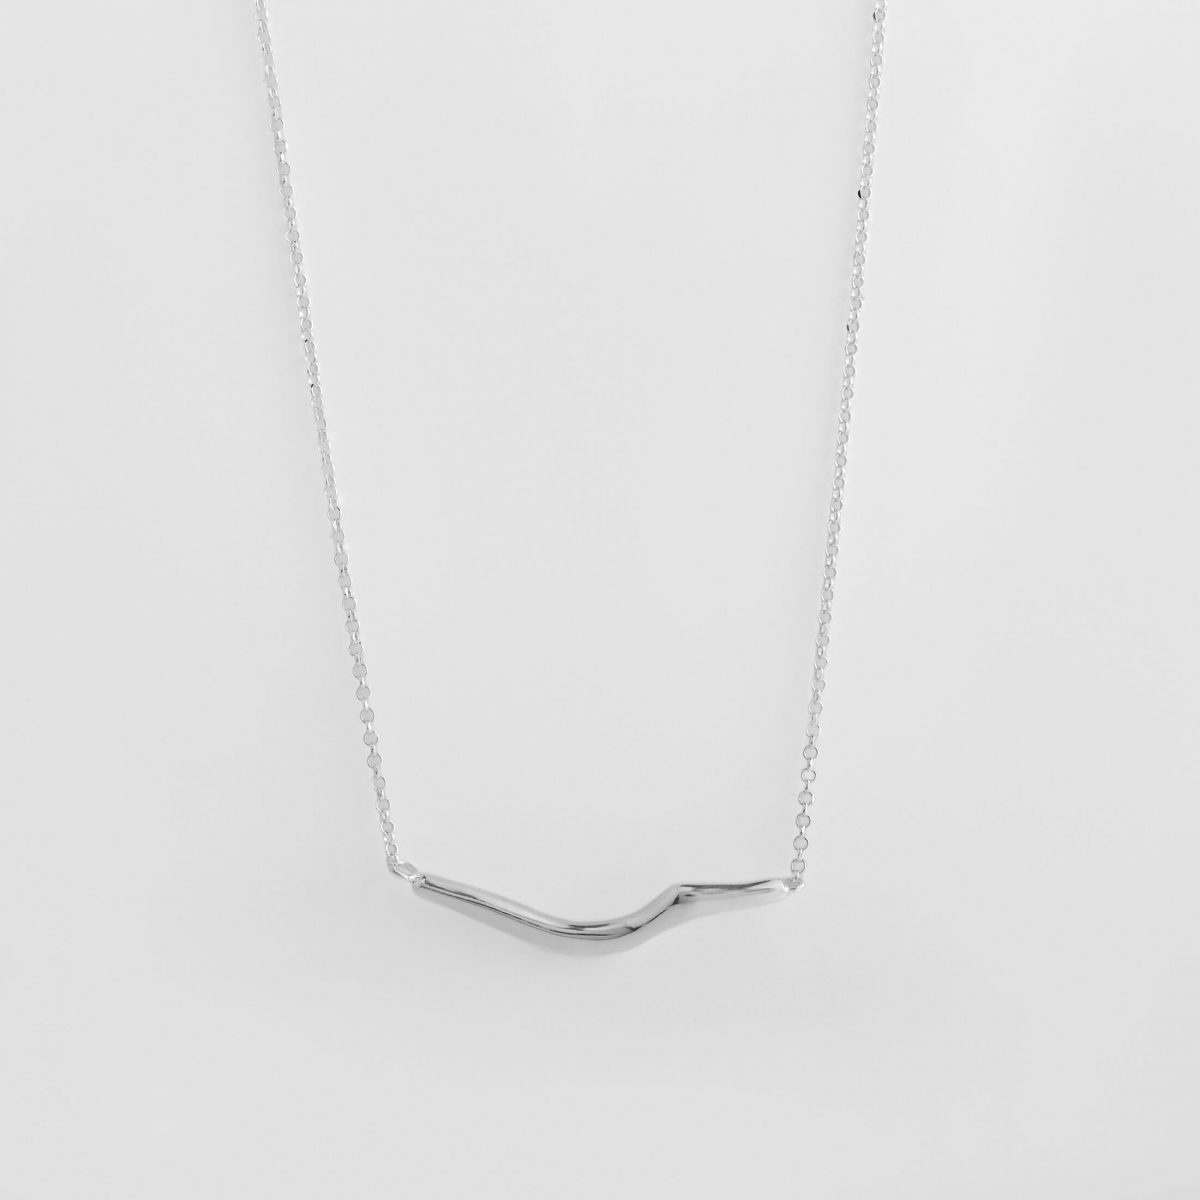 Silver Olympus Necklace by Xoutou's